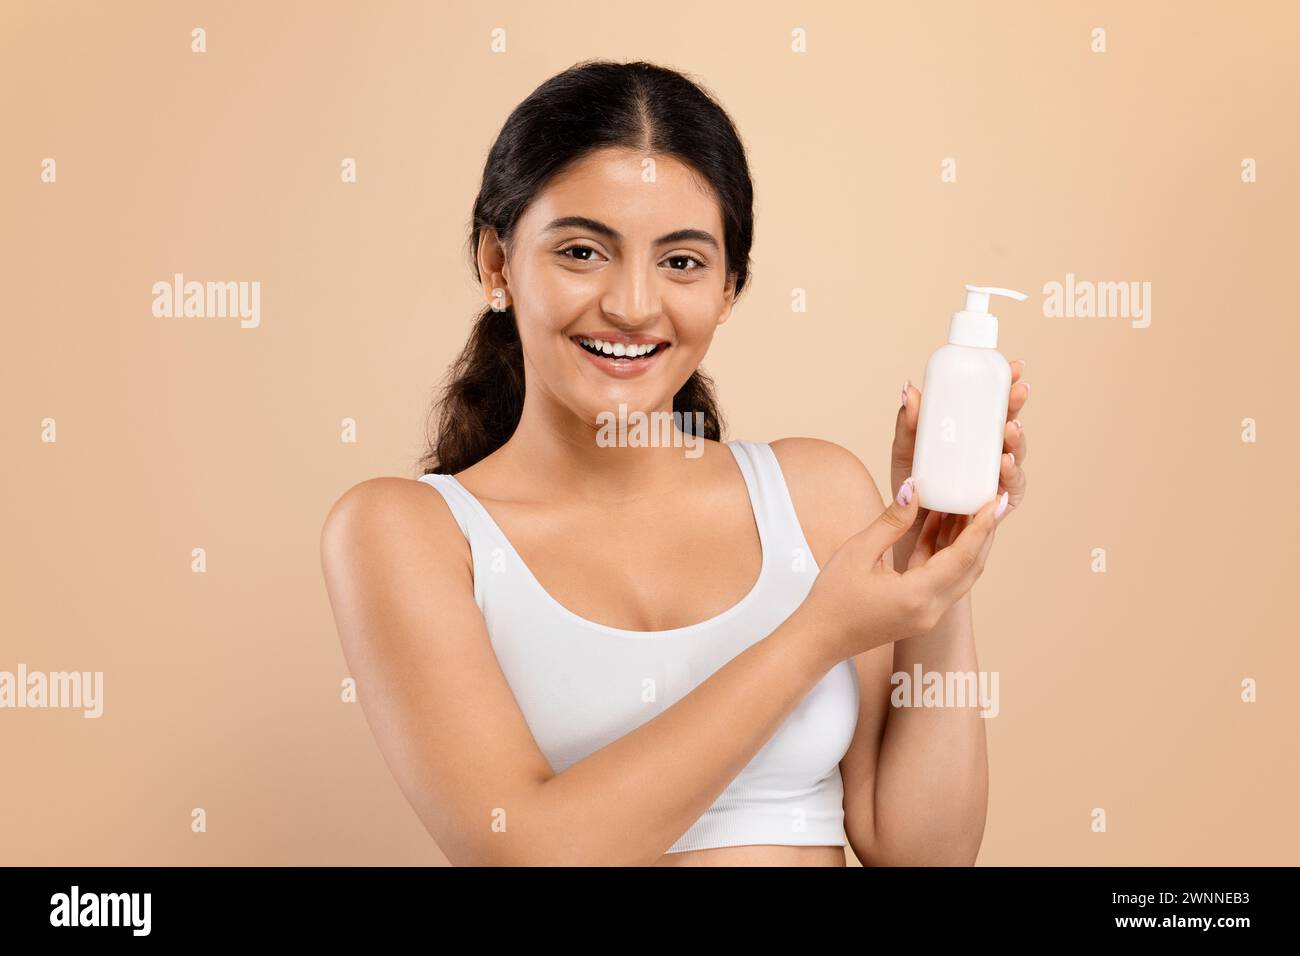 Indian woman with beautiful smile holding white lotion dispenser Stock Photo